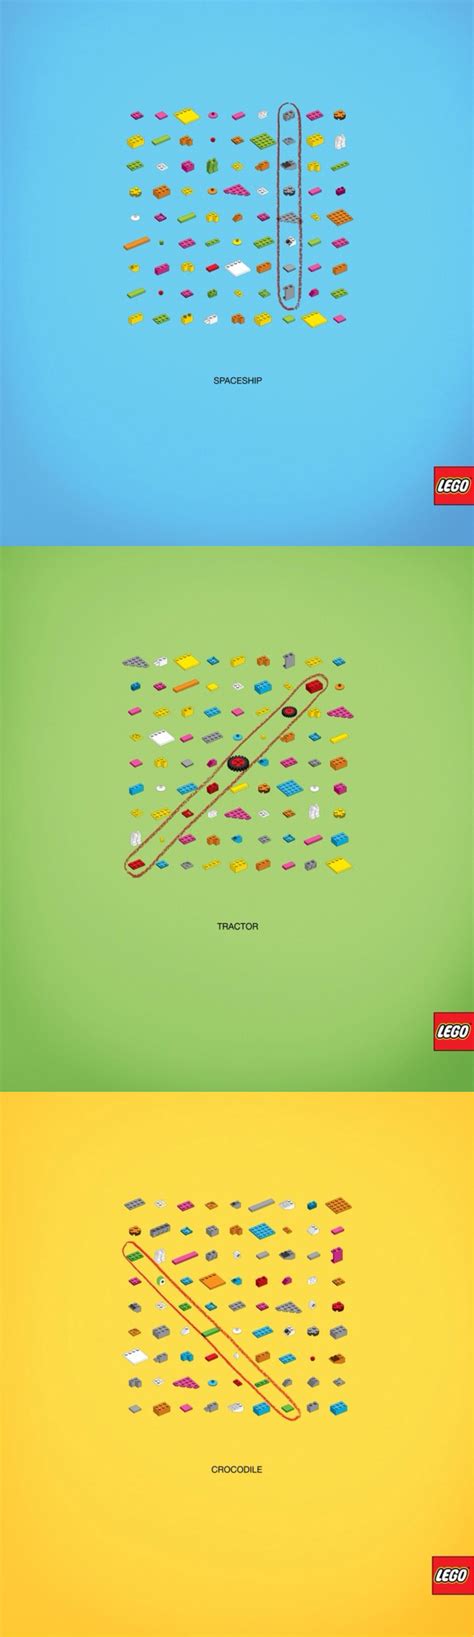 Lego Word Puzzle Ad Campaign Lego Words Commercial Ads Christmas Ad